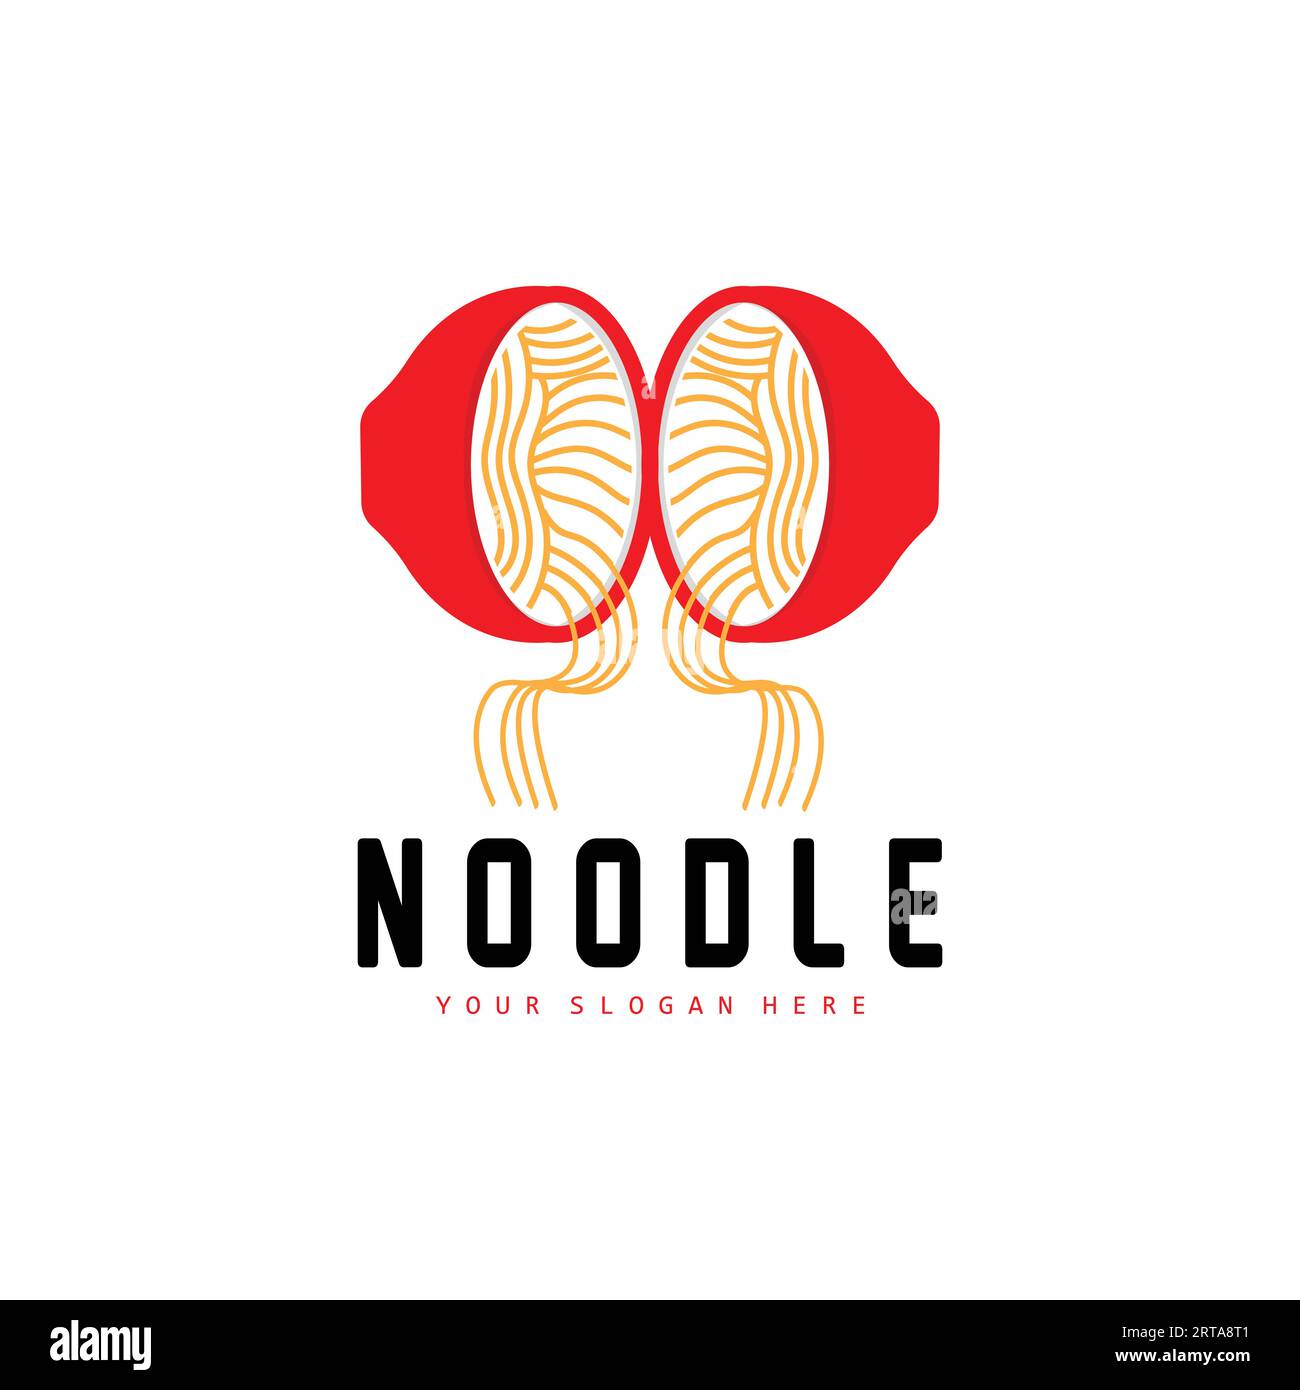 Noodle Logo, Ramen Vector, Chinese Food, Fast Food Restaurant Brand Design, Product Brand, Cafe, Company Logo Stock Vector